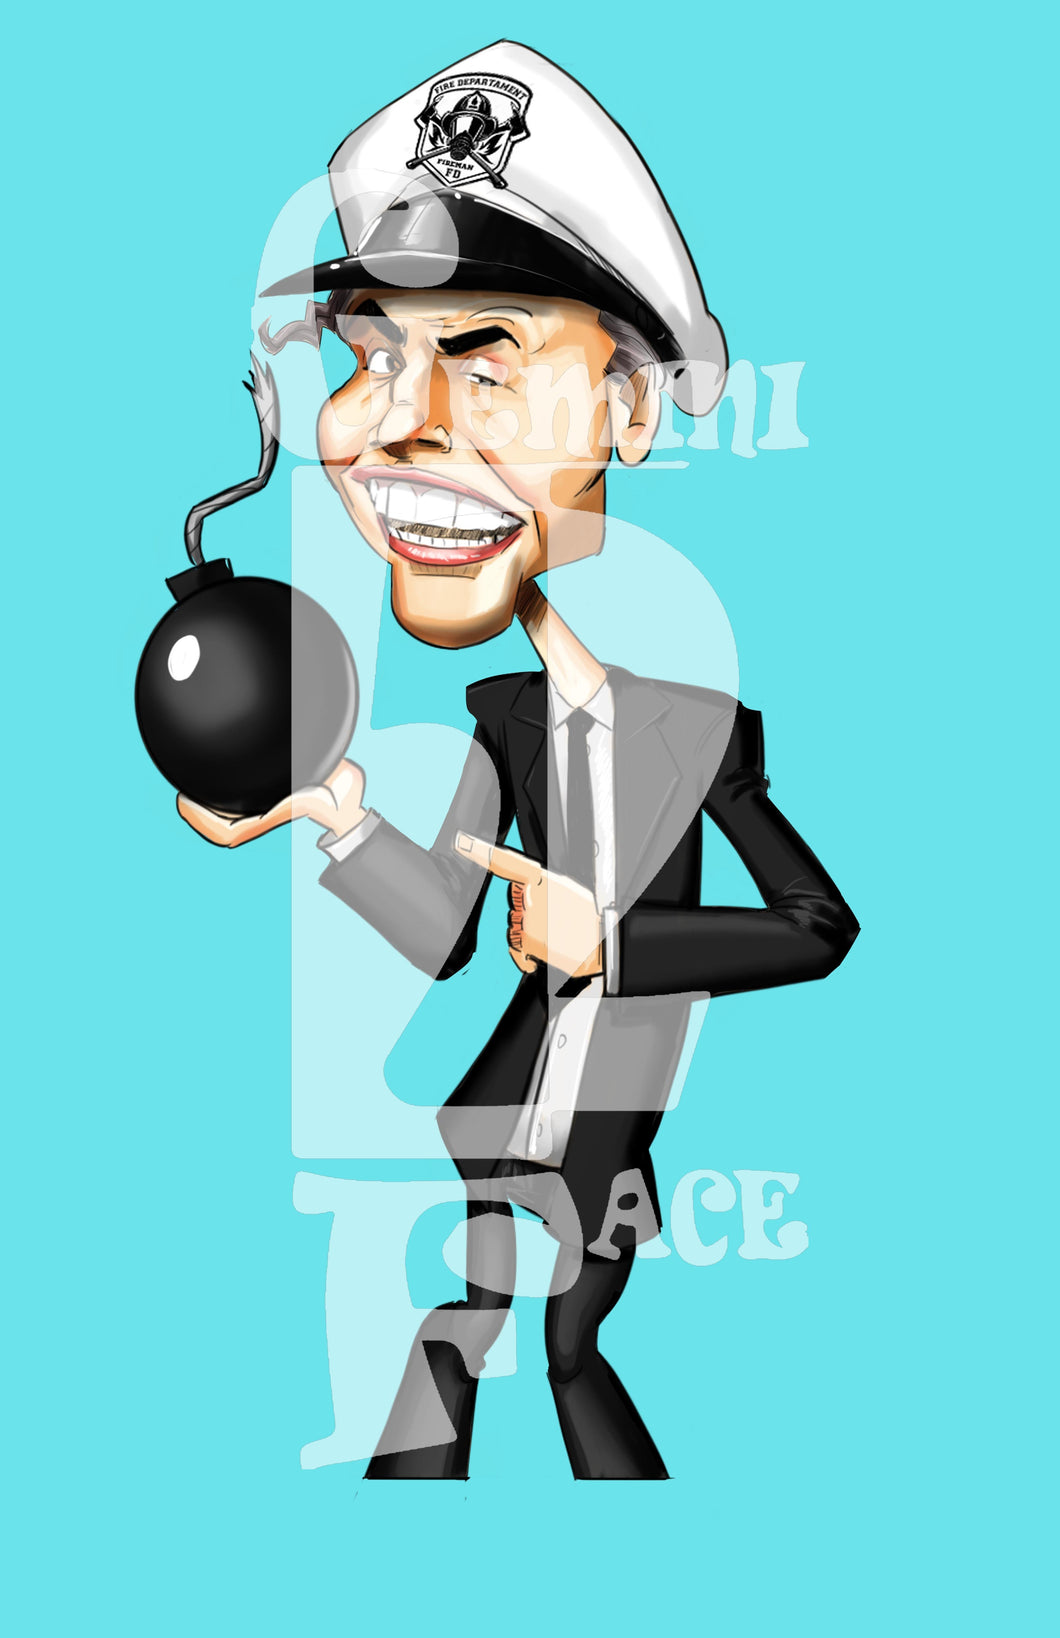 Fire Marshall Bill w/o background (exclusive) PNG PNG File Gemini2face Art E-Store 